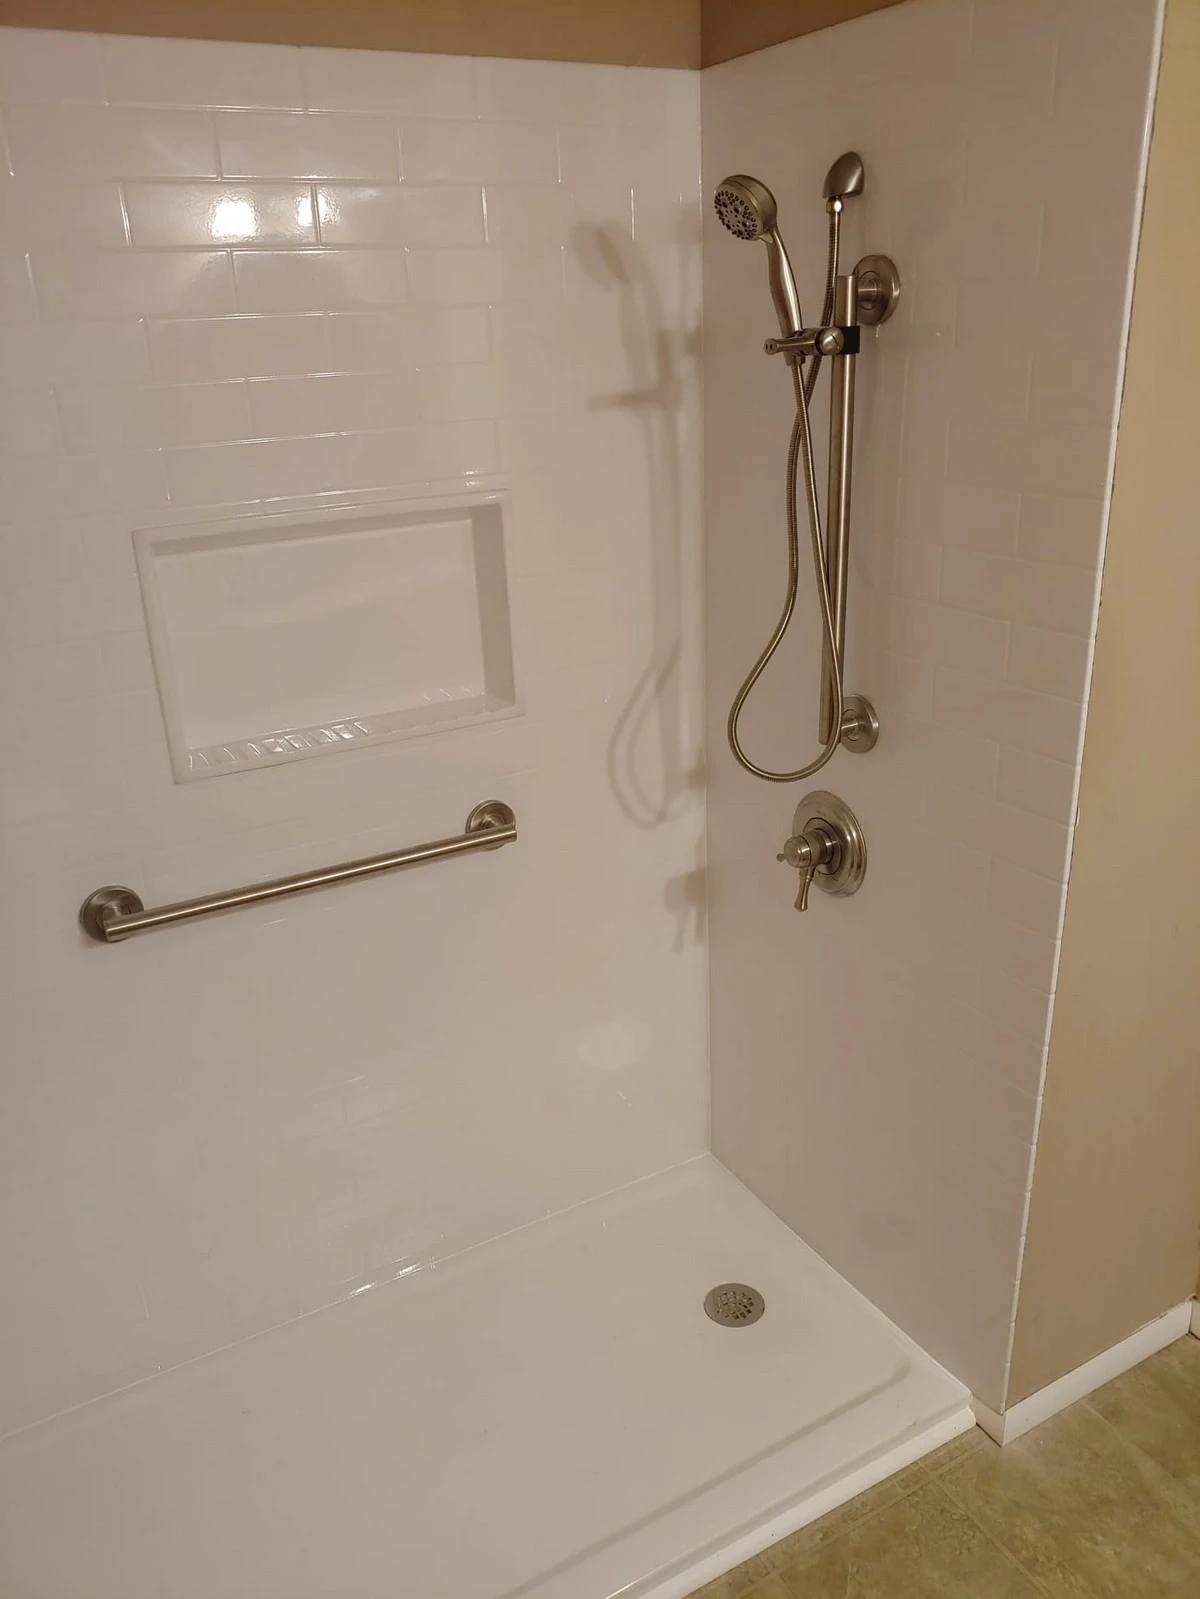 An accessible shower remodeling project completed by Mr. Handyman.